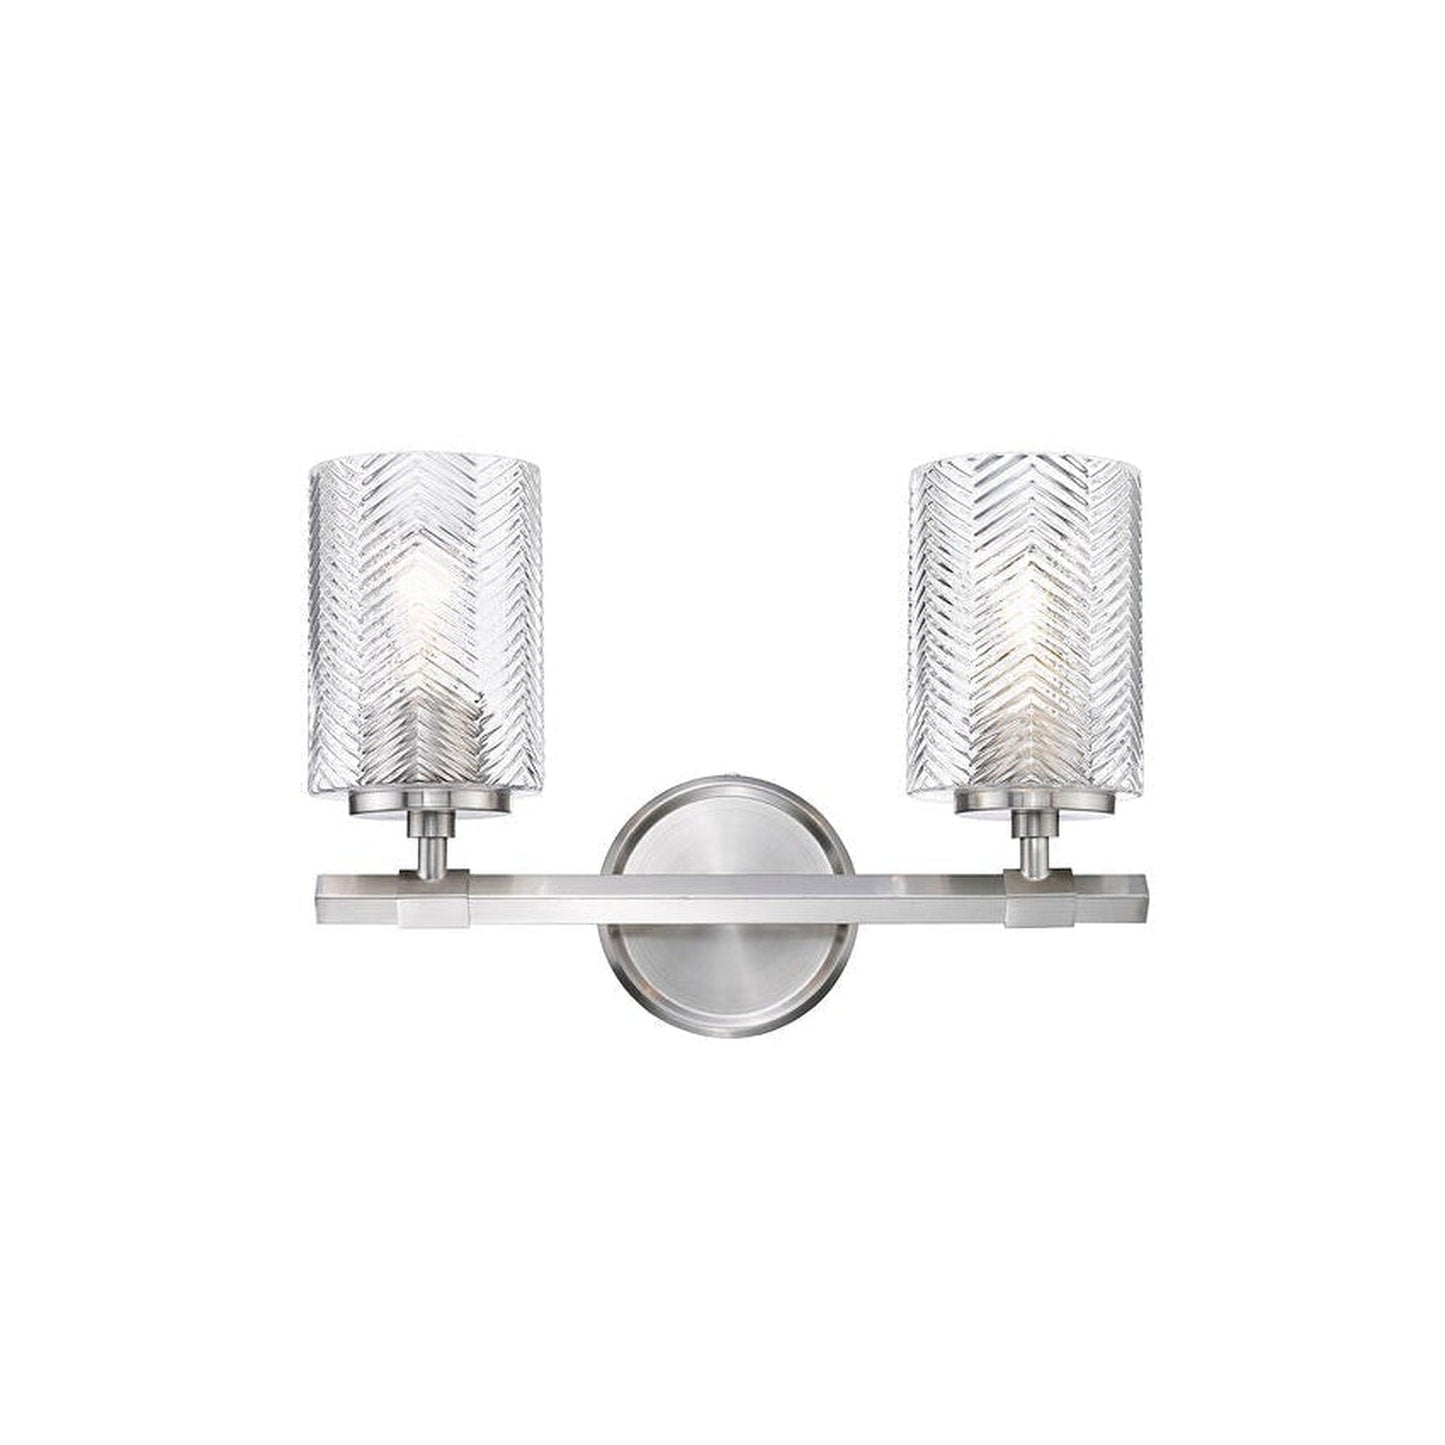 Z-Lite Dover Street 14" 2-Light Brushed Nickel Vanity Light With Clear Glass Shade